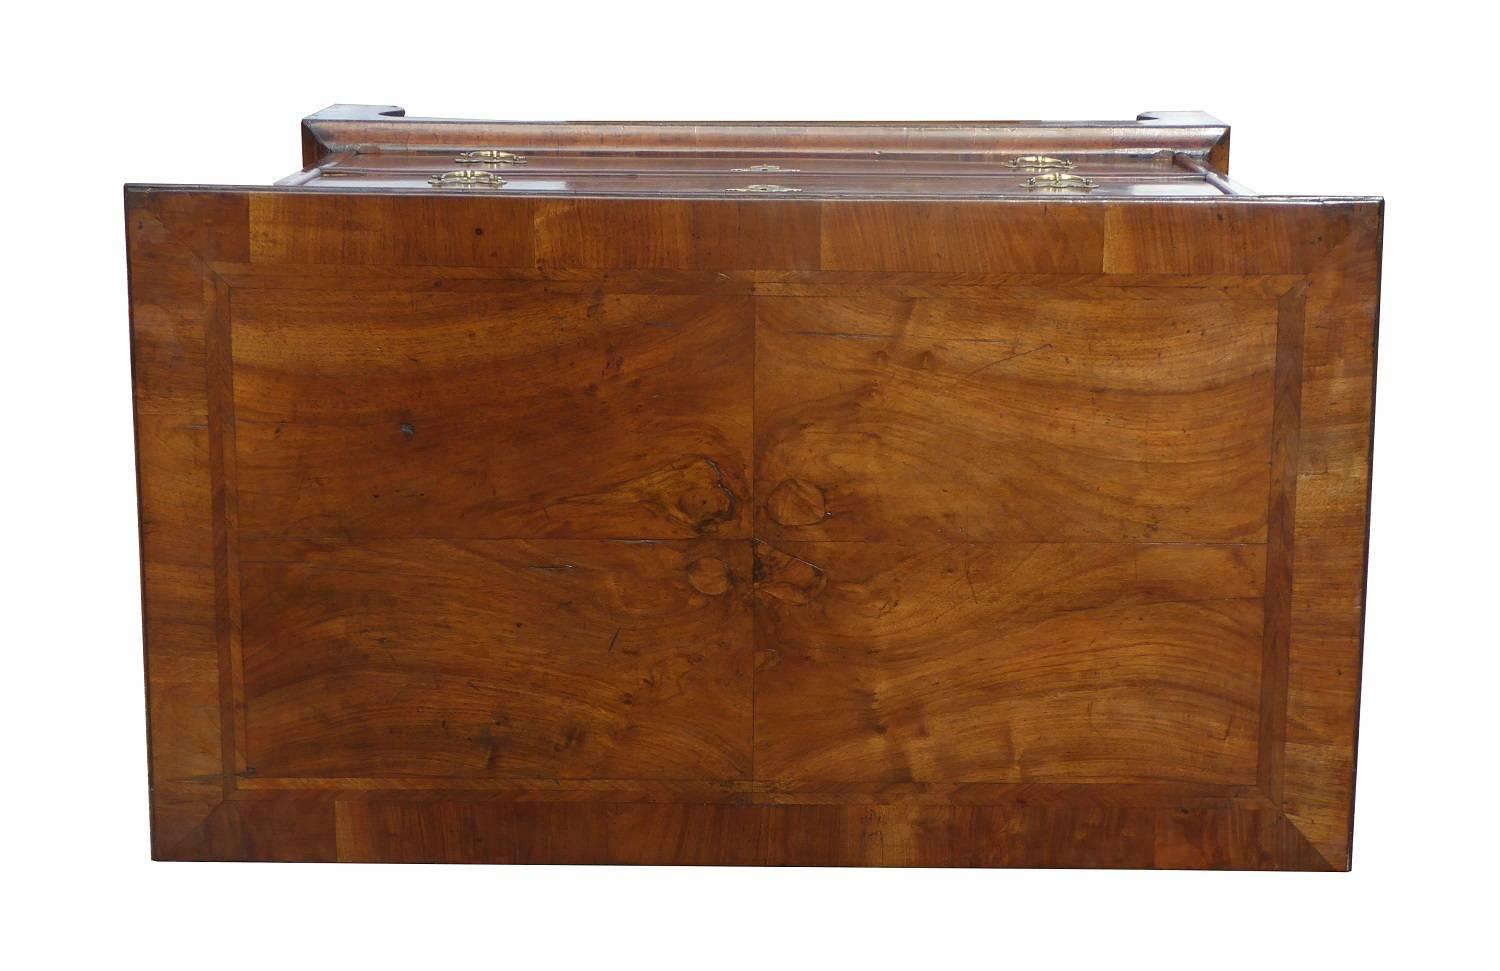 For sale is a good quality George III figured walnut chest of drawers. The top of the chest is quarter veneered, inlaid with heringbone inlay and has a walnut banding to the edge. Below this is an arrangement of two short drawers above three further